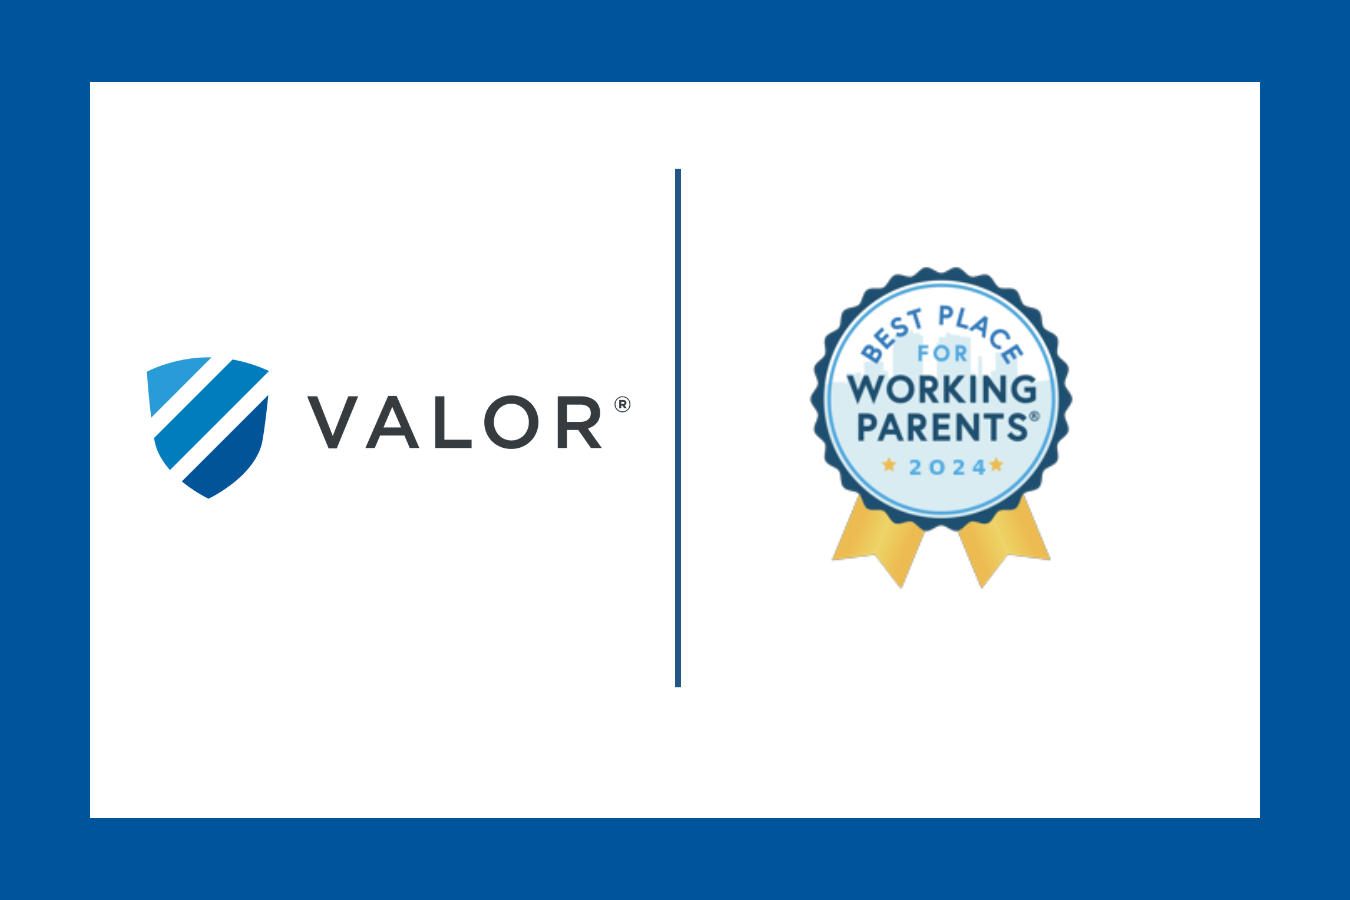 Valor receives designation as one of the 2024 Best Places For Working Parents®